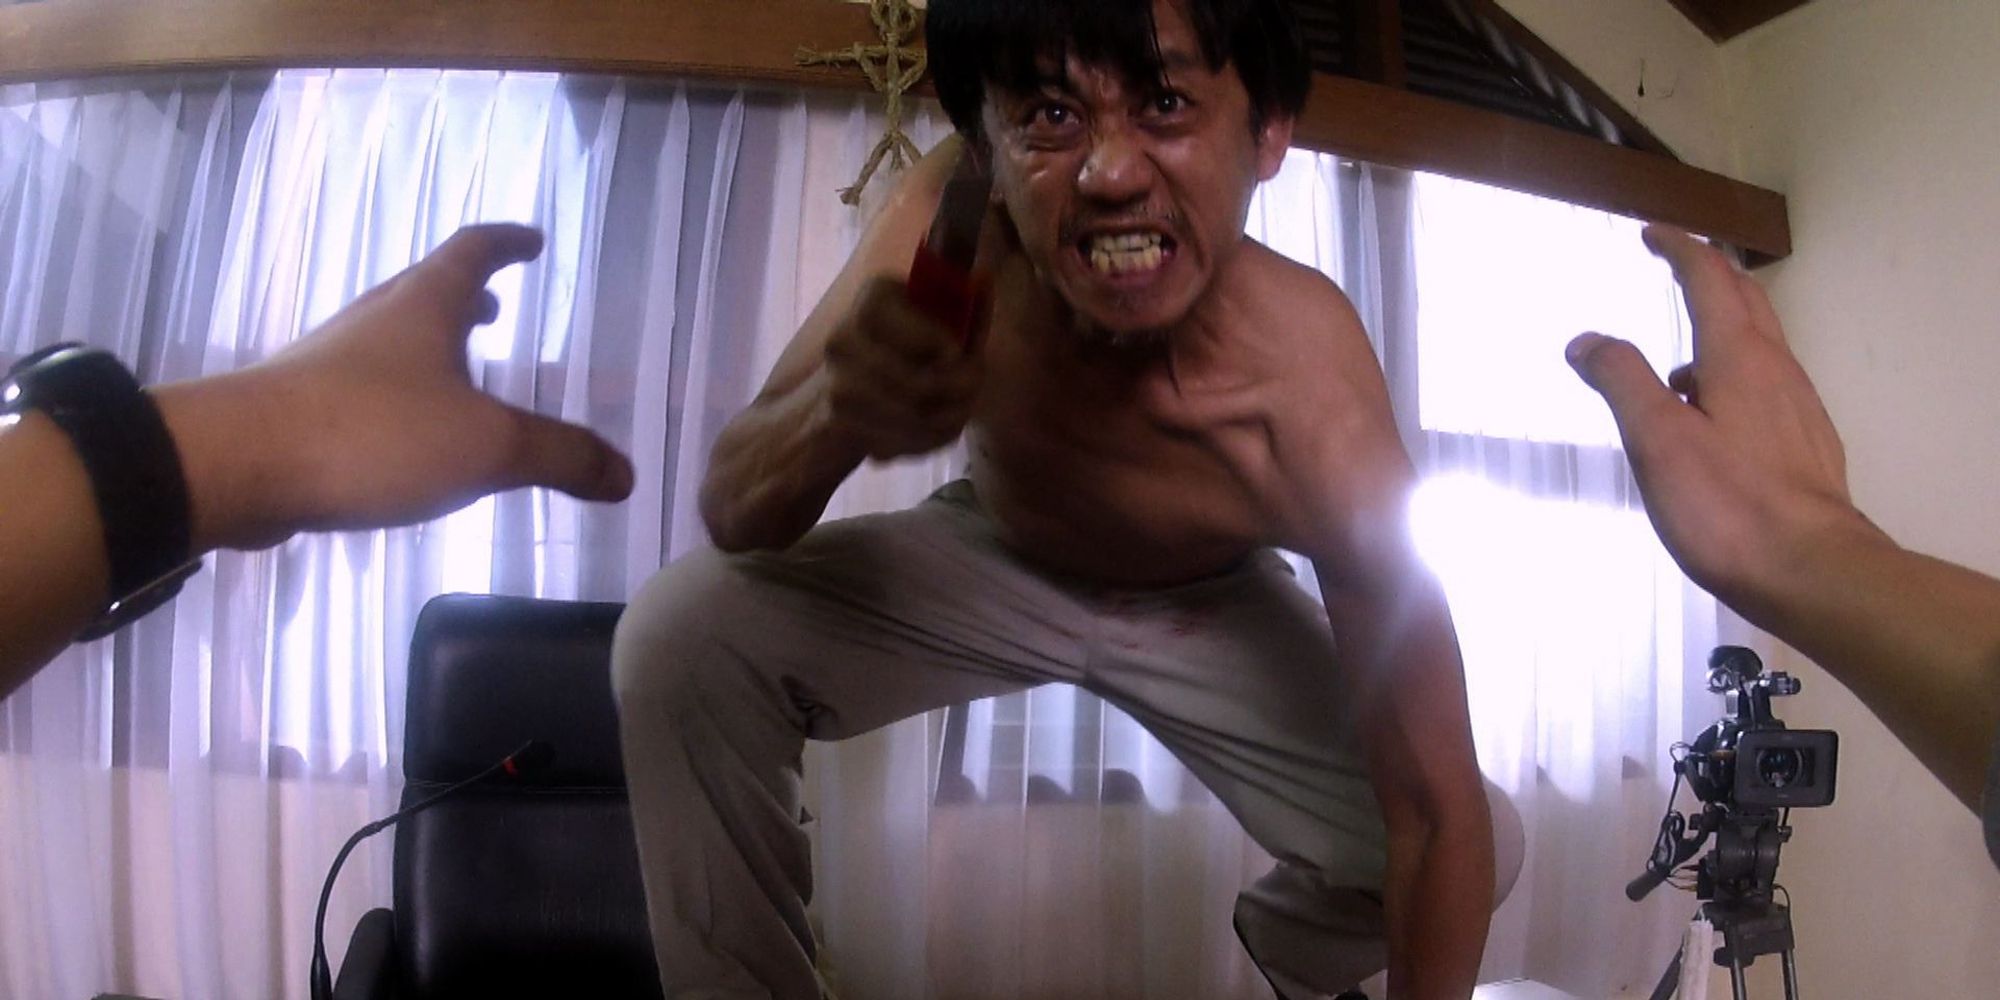 A man aggressively lunges at the camera with a weapon in VHS 2.